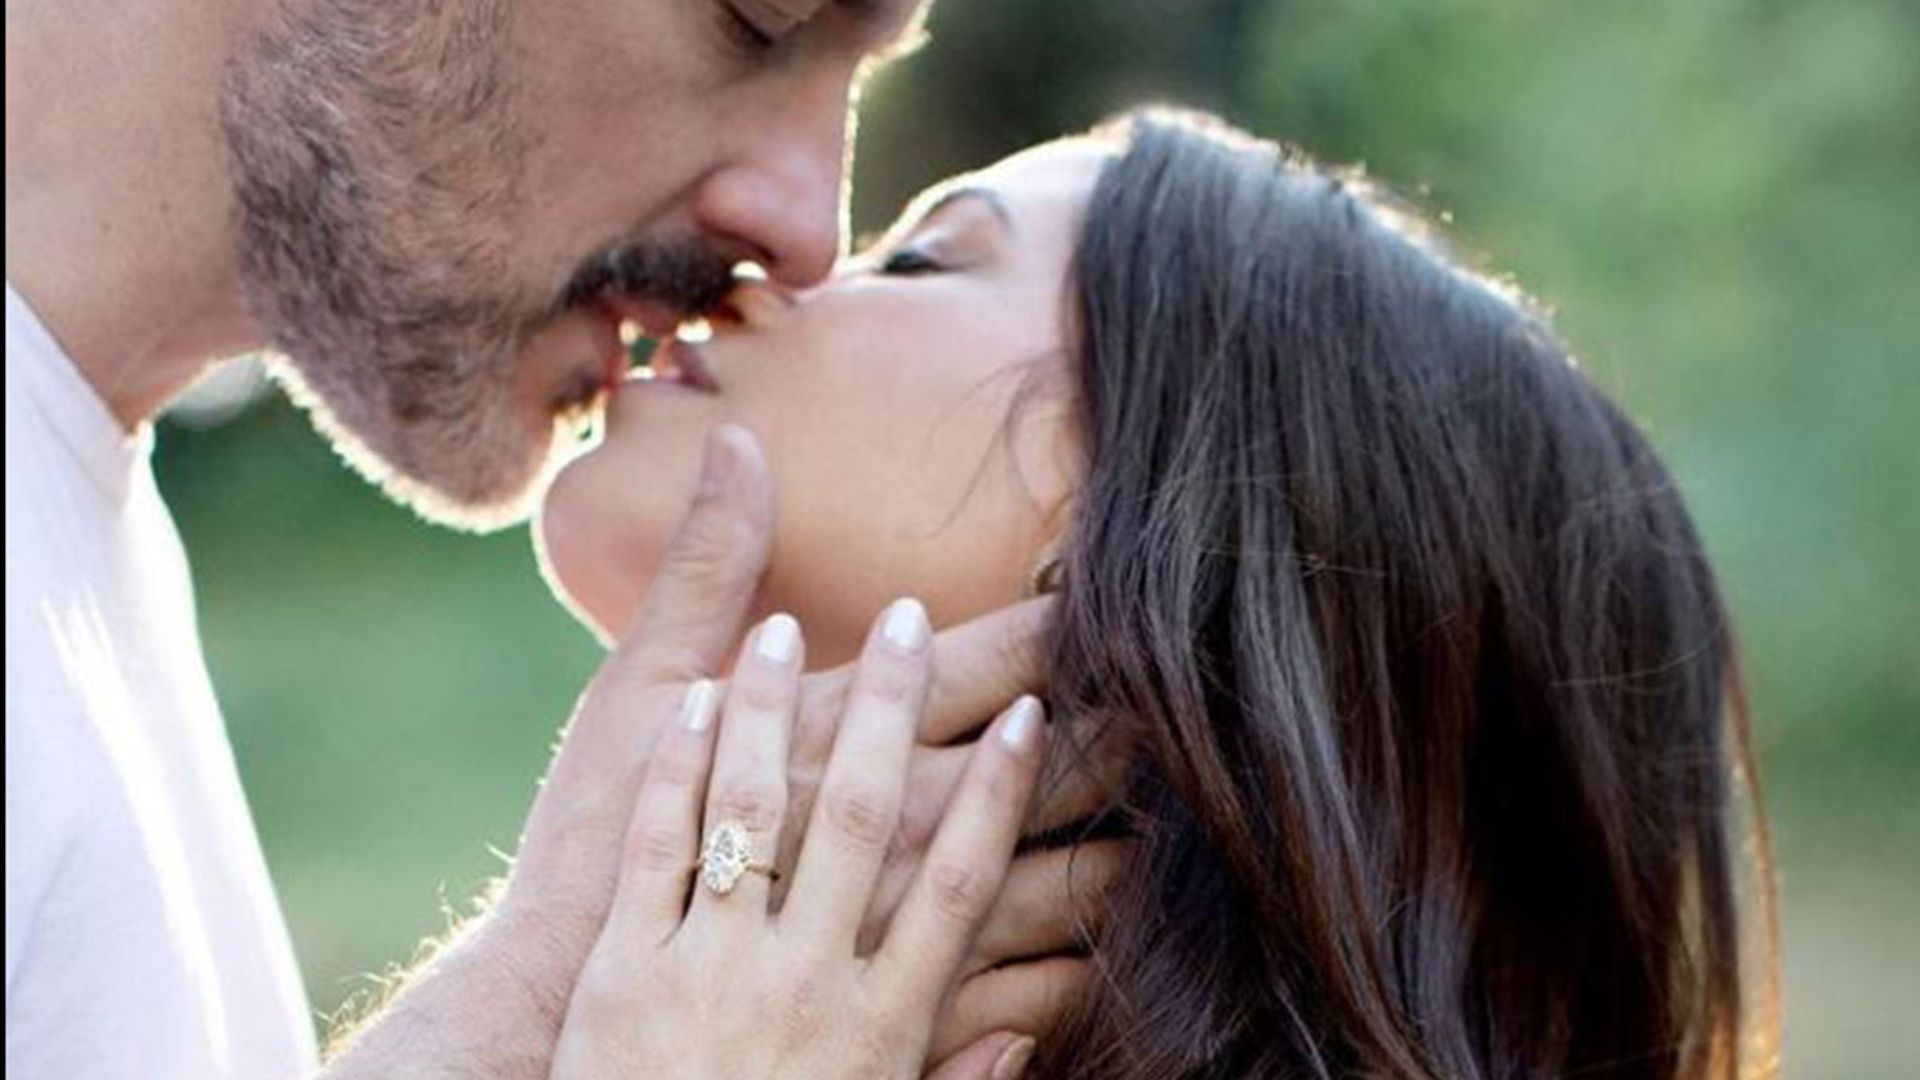 Heavily pregnant Jenna Dewan announces engagement – see her stunning ring!